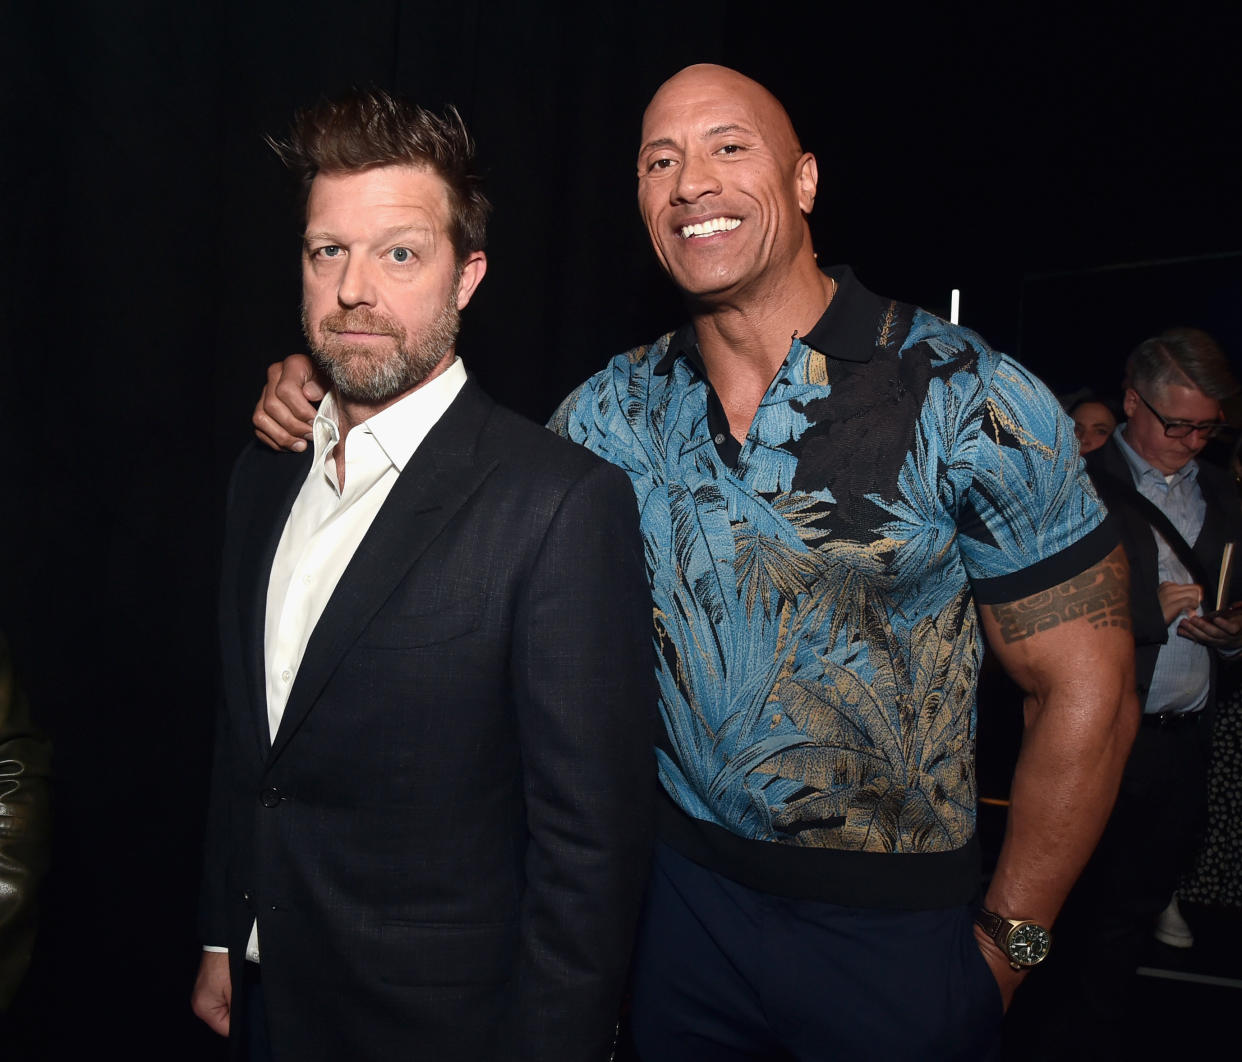 LAS VEGAS, NV - APRIL 03: (L-R) Director David Leitch and Dwayne Johnson at CinemaCon 2019 Universal Pictures Invites You to a Special Presentation Featuring Footage from its Upcoming Slate at The Colosseum at Caesars Palace during CinemaCon, the official convention of the National Association of Theatre Owners, on April 3, 2019 in Las Vegas, Nevada.  (Photo by Alberto E. Rodriguez/Getty Images for CinemaCon)